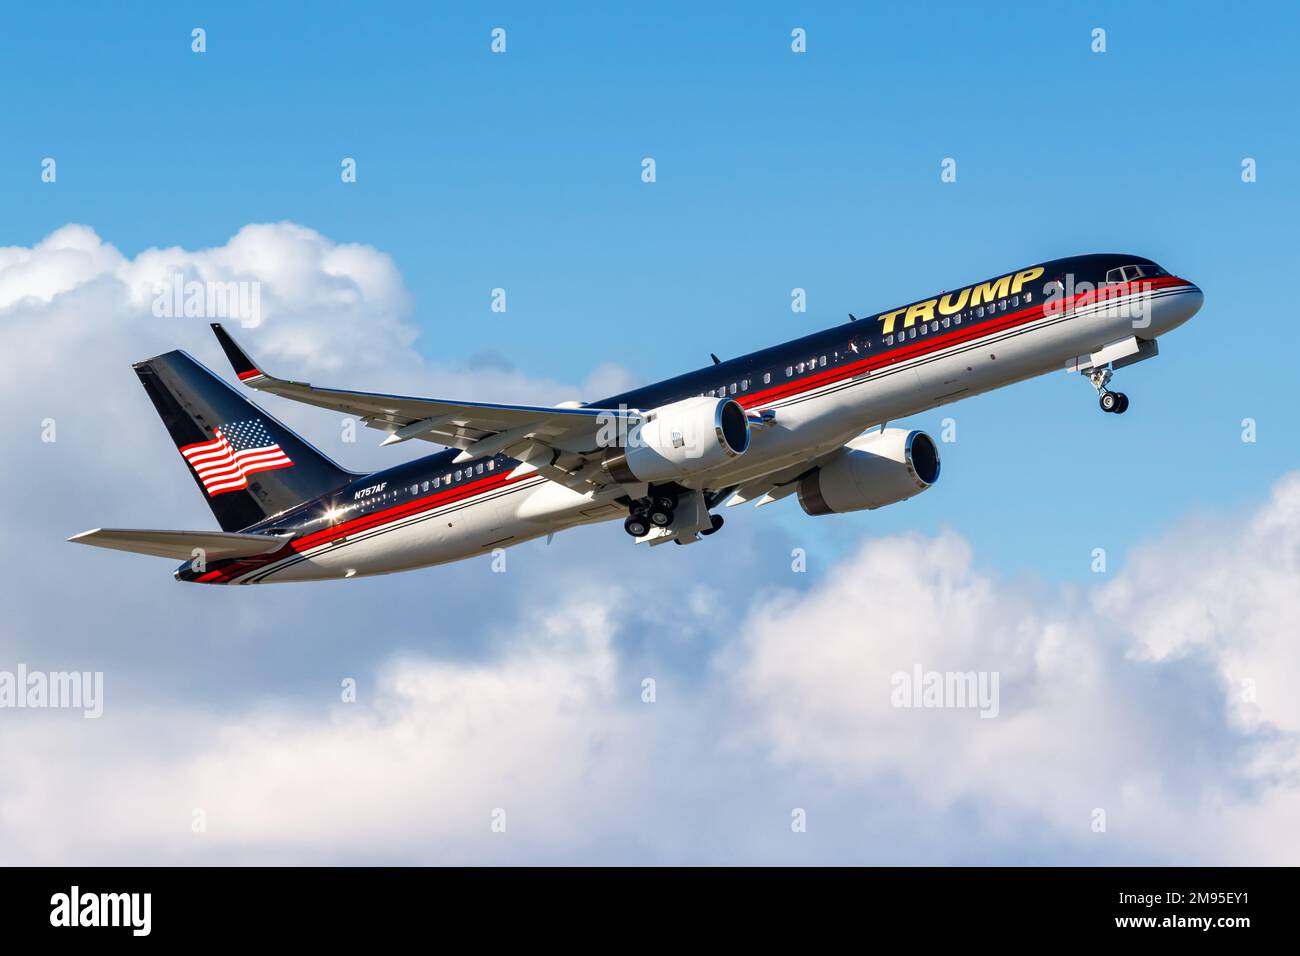 West Palm Beach, United States - November 13, 2022: Boeing 757-200 airplane of Donald Trump at Palm Beach airport (PBI) in the United States. Stock Photo